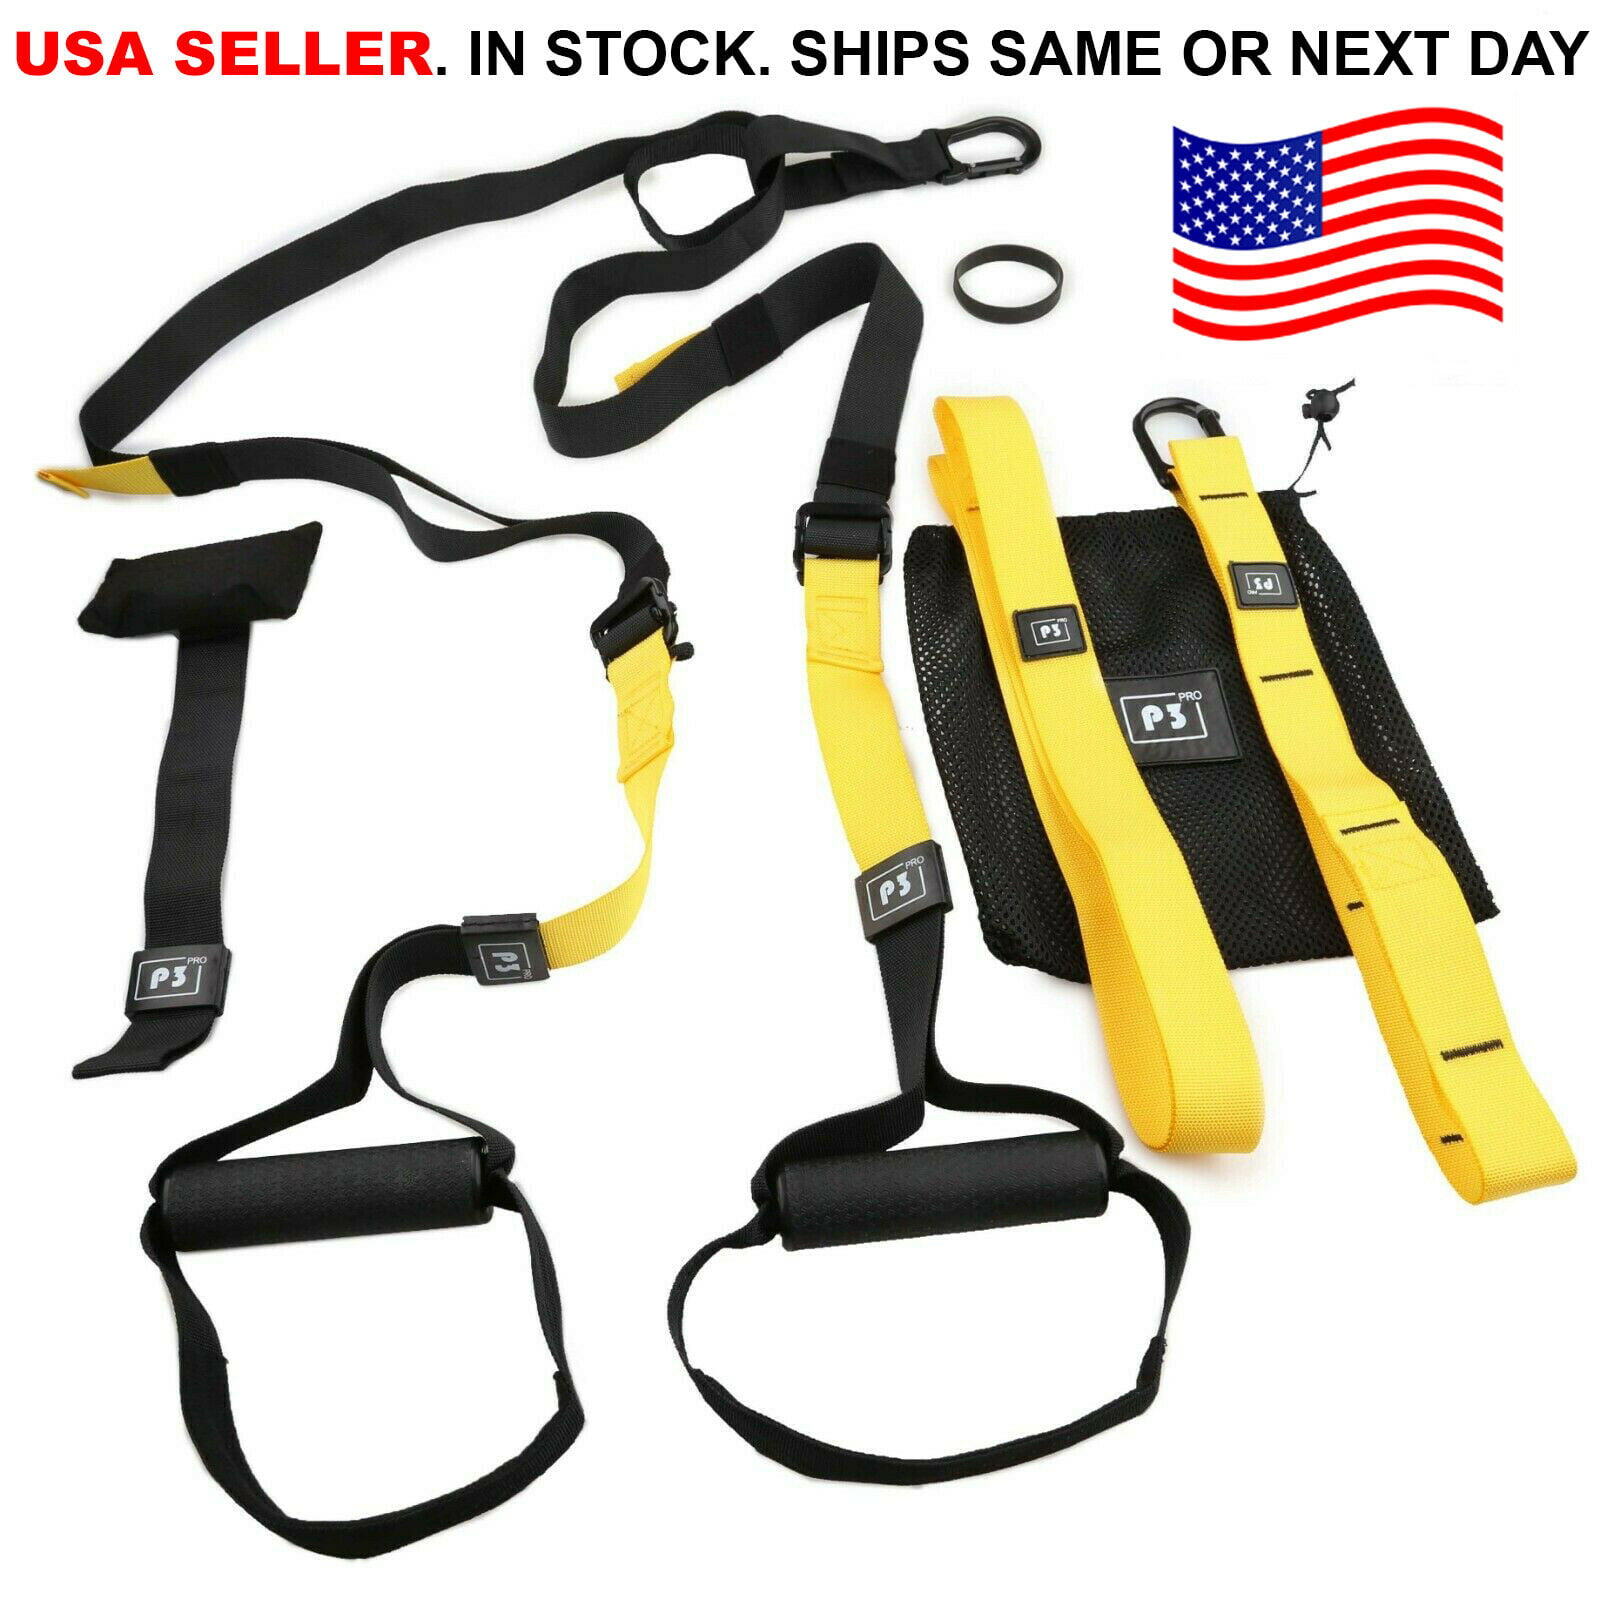 PRO P3 Home Gym Suspension Resistance Strength Training Straps Workout Trainer 